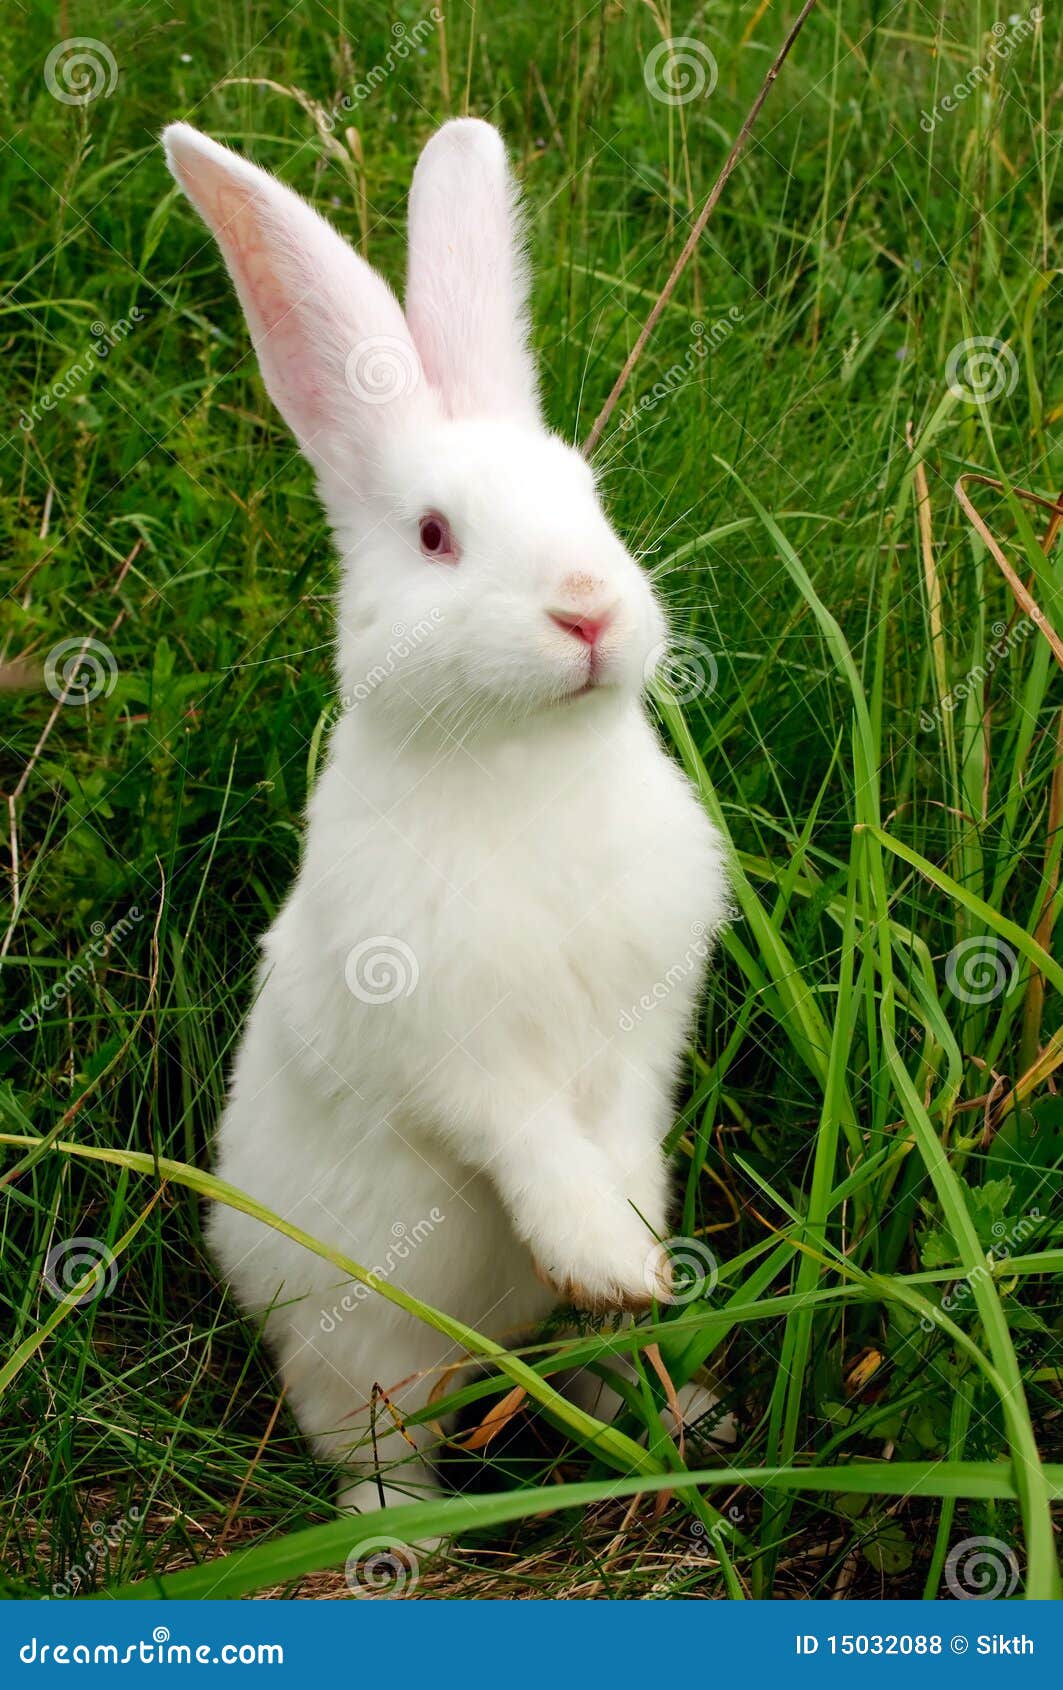 cute white rabbit standing on hind legs